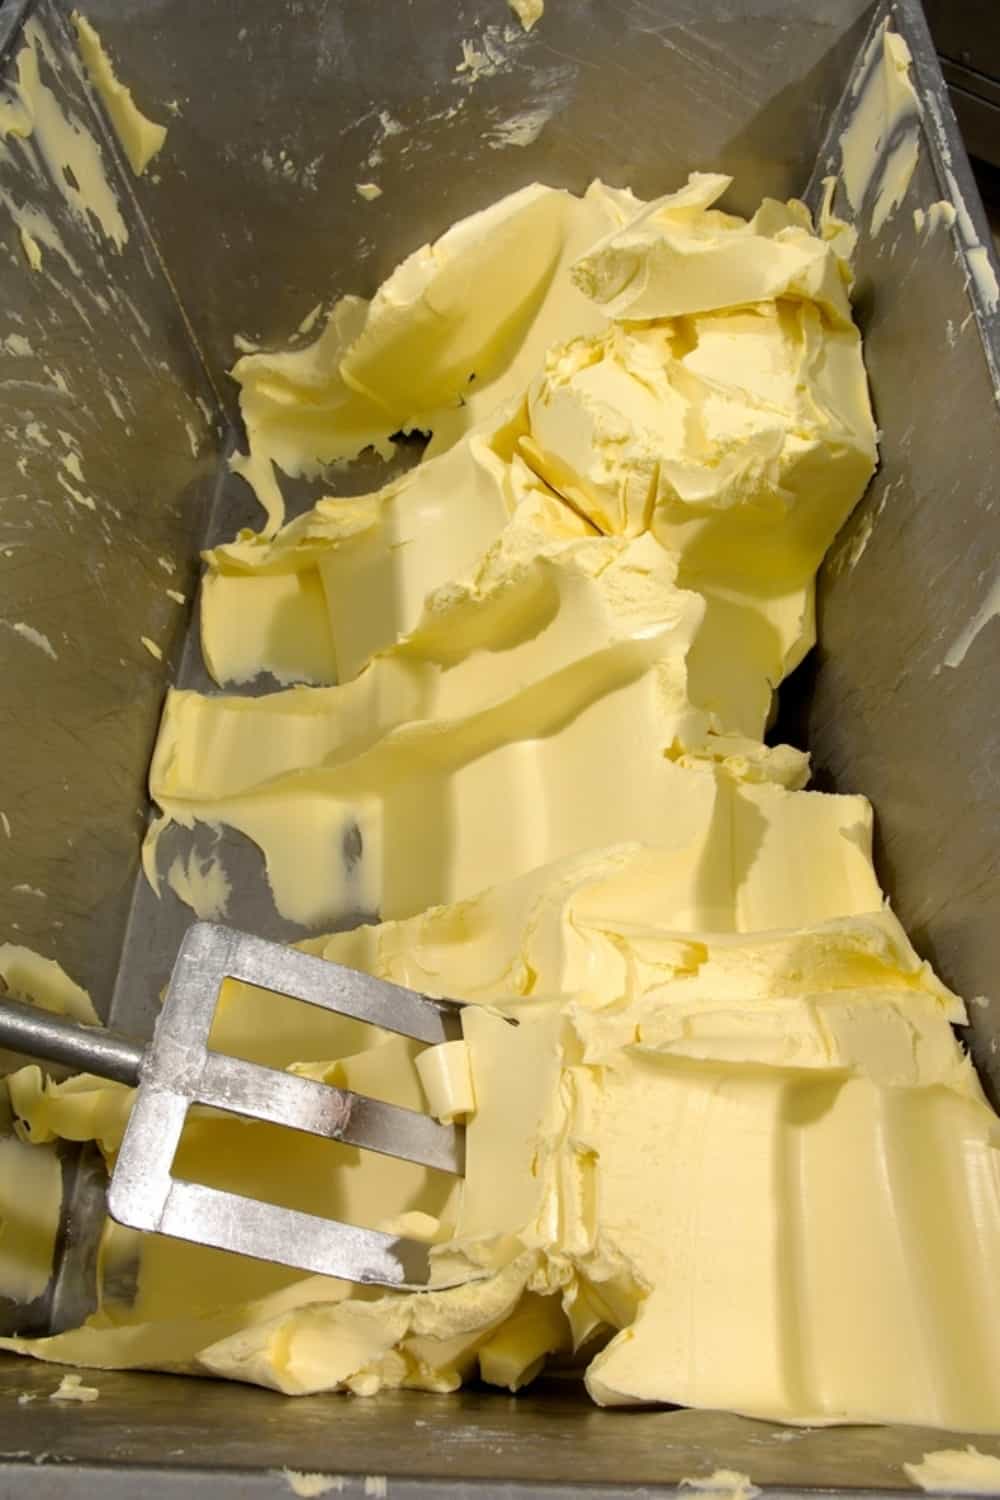 Manufacture of industrial butter in a butter industrial churn